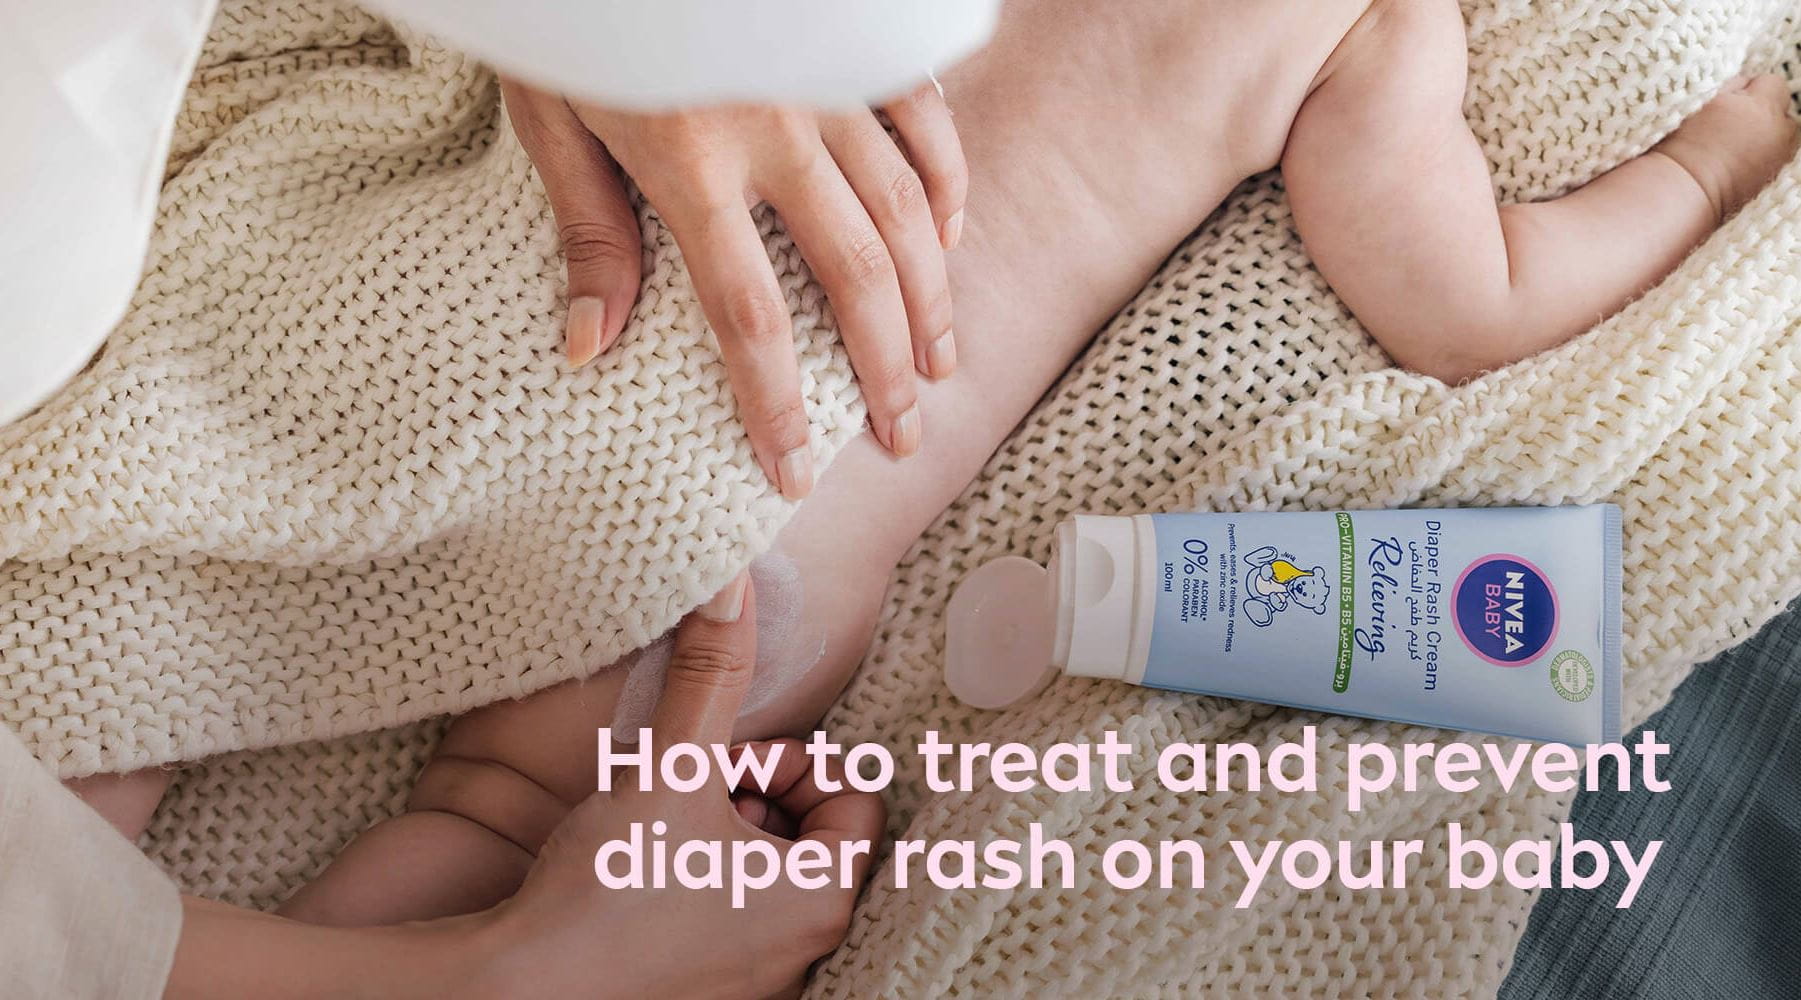 How to treat and prevent diaper rash on your baby